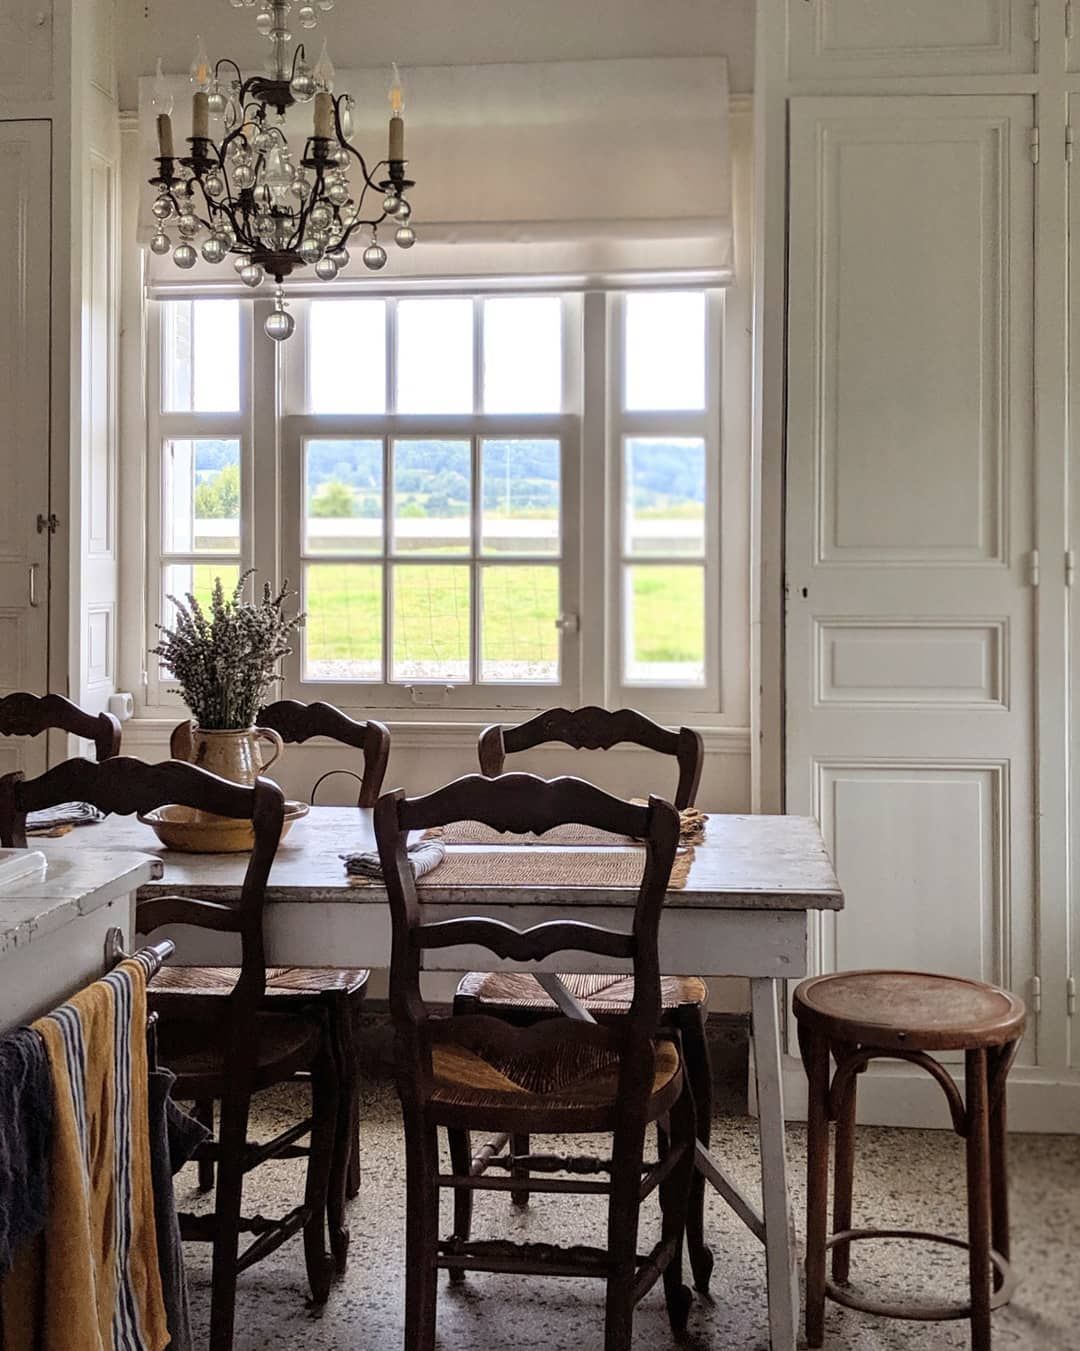 Vintage Wood Chairs in French Country Breakfast Nook via @cat_in_france